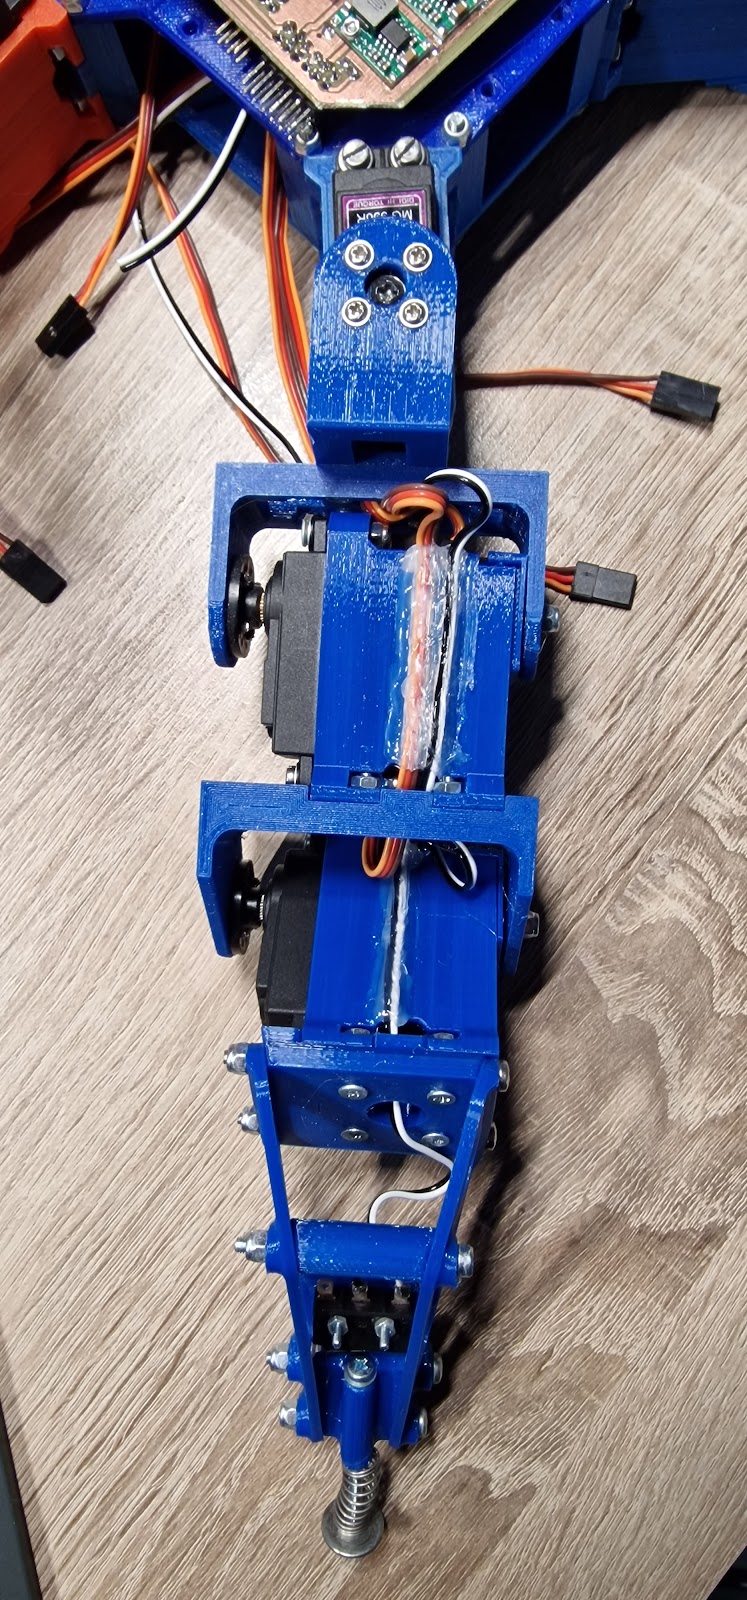 End leg switch and servo cables